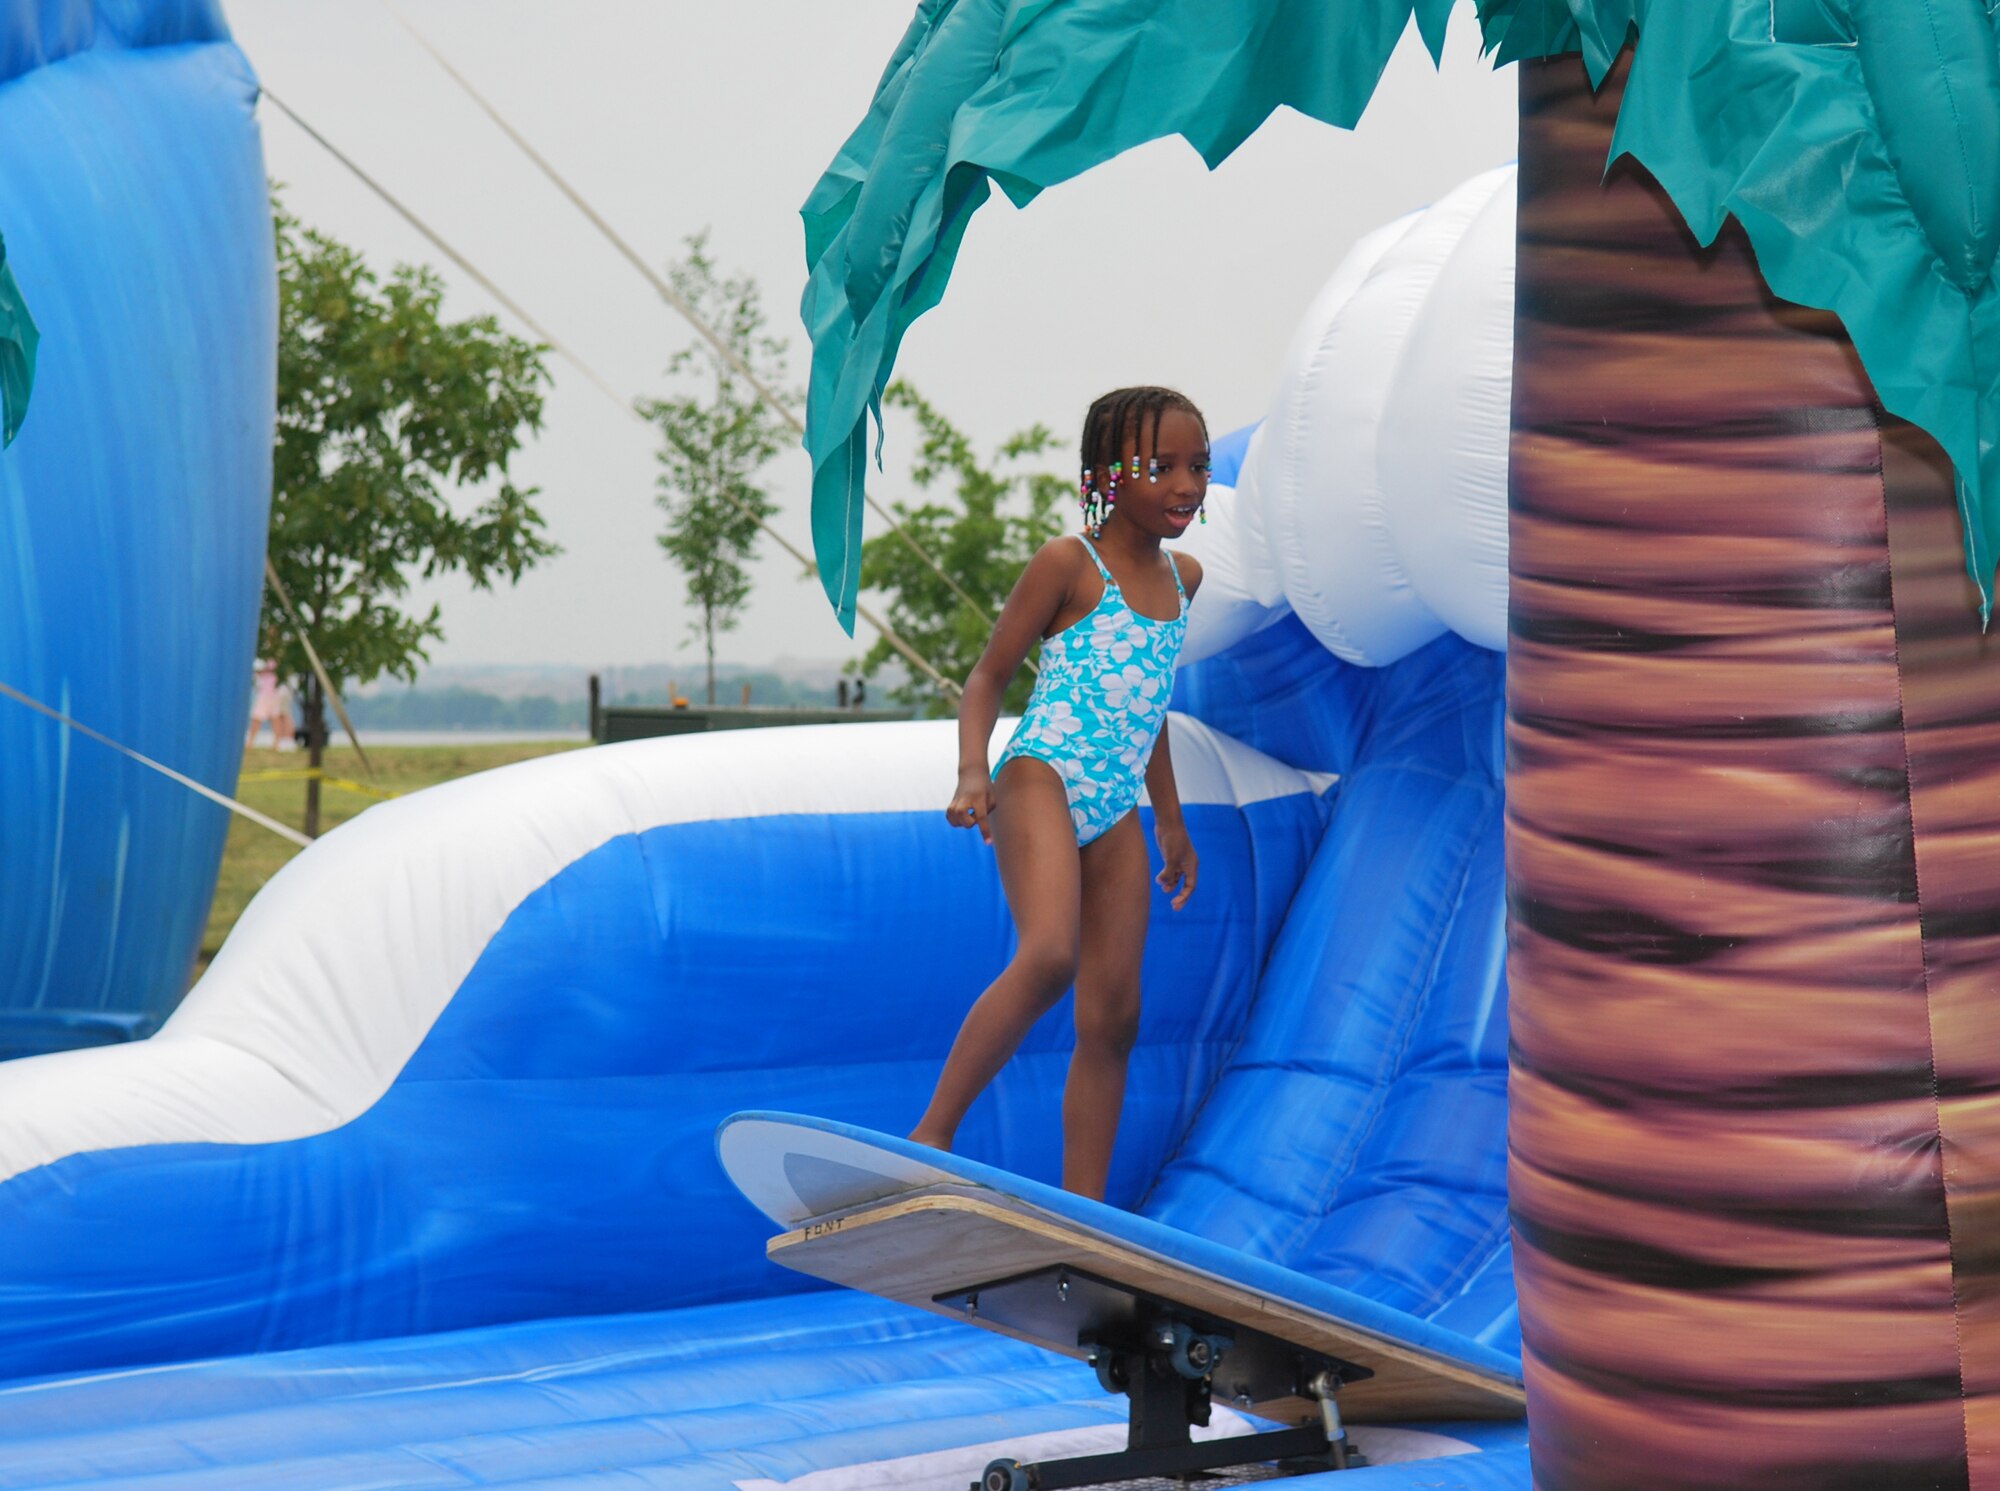 A Bolling youth takes a ride on the surf simulator July 4 during the 6th Annual Freedom Fest at Bolling Green Park. (U.S. Air Force photo by Senior Airman Edward Carr)